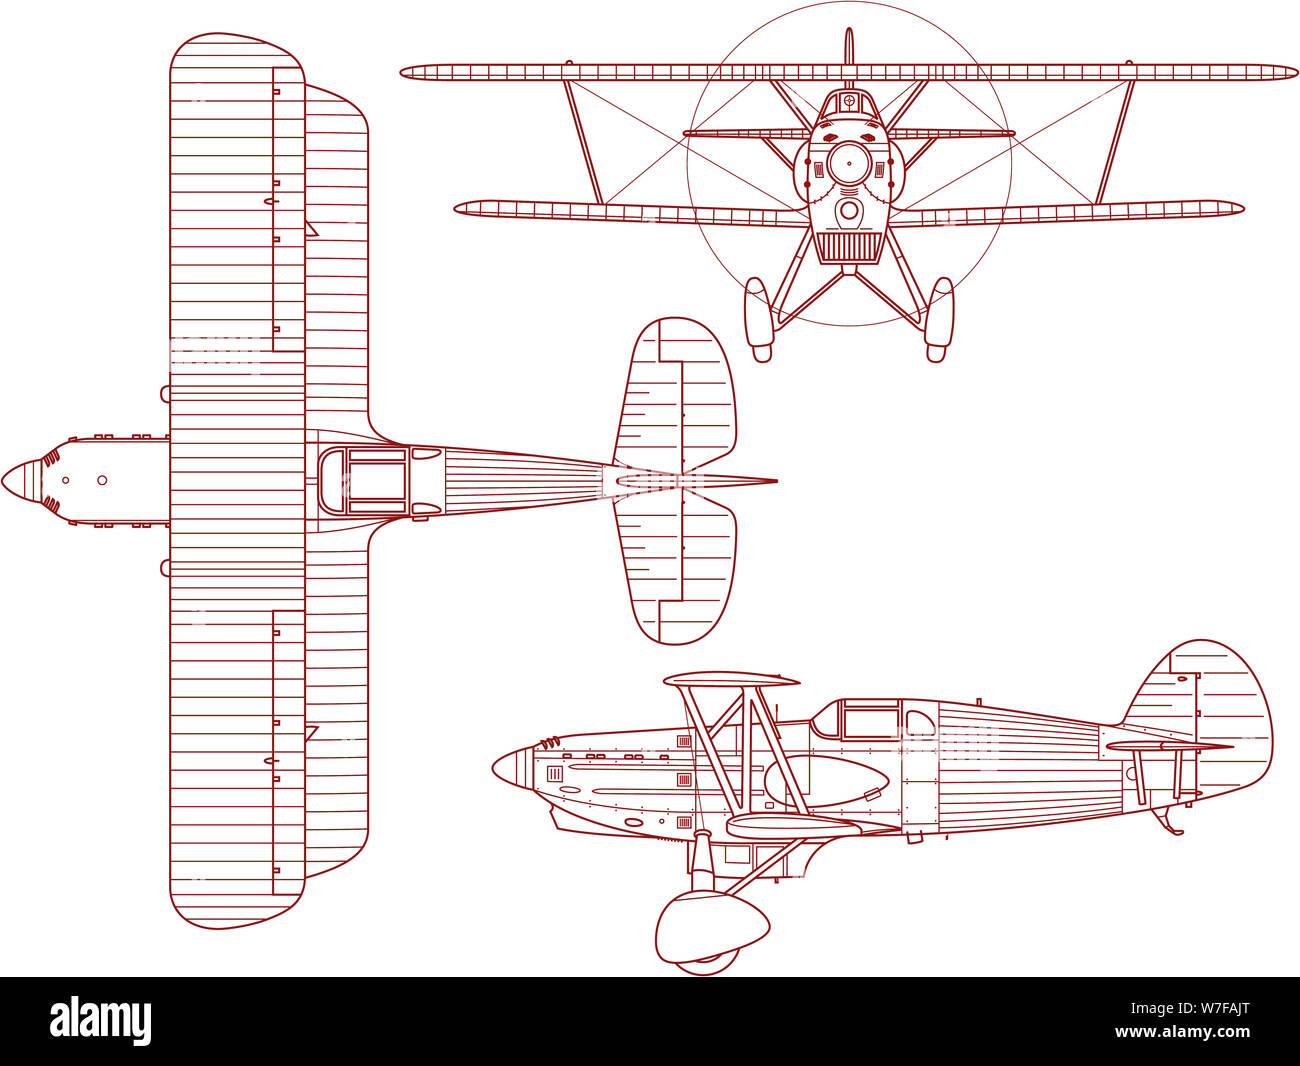 Schematic engineering blueprint of a Avia B-534 biplane as seen from the side the top and the front. This bi-plane was produced and made by Avia in Cz Stock Photo